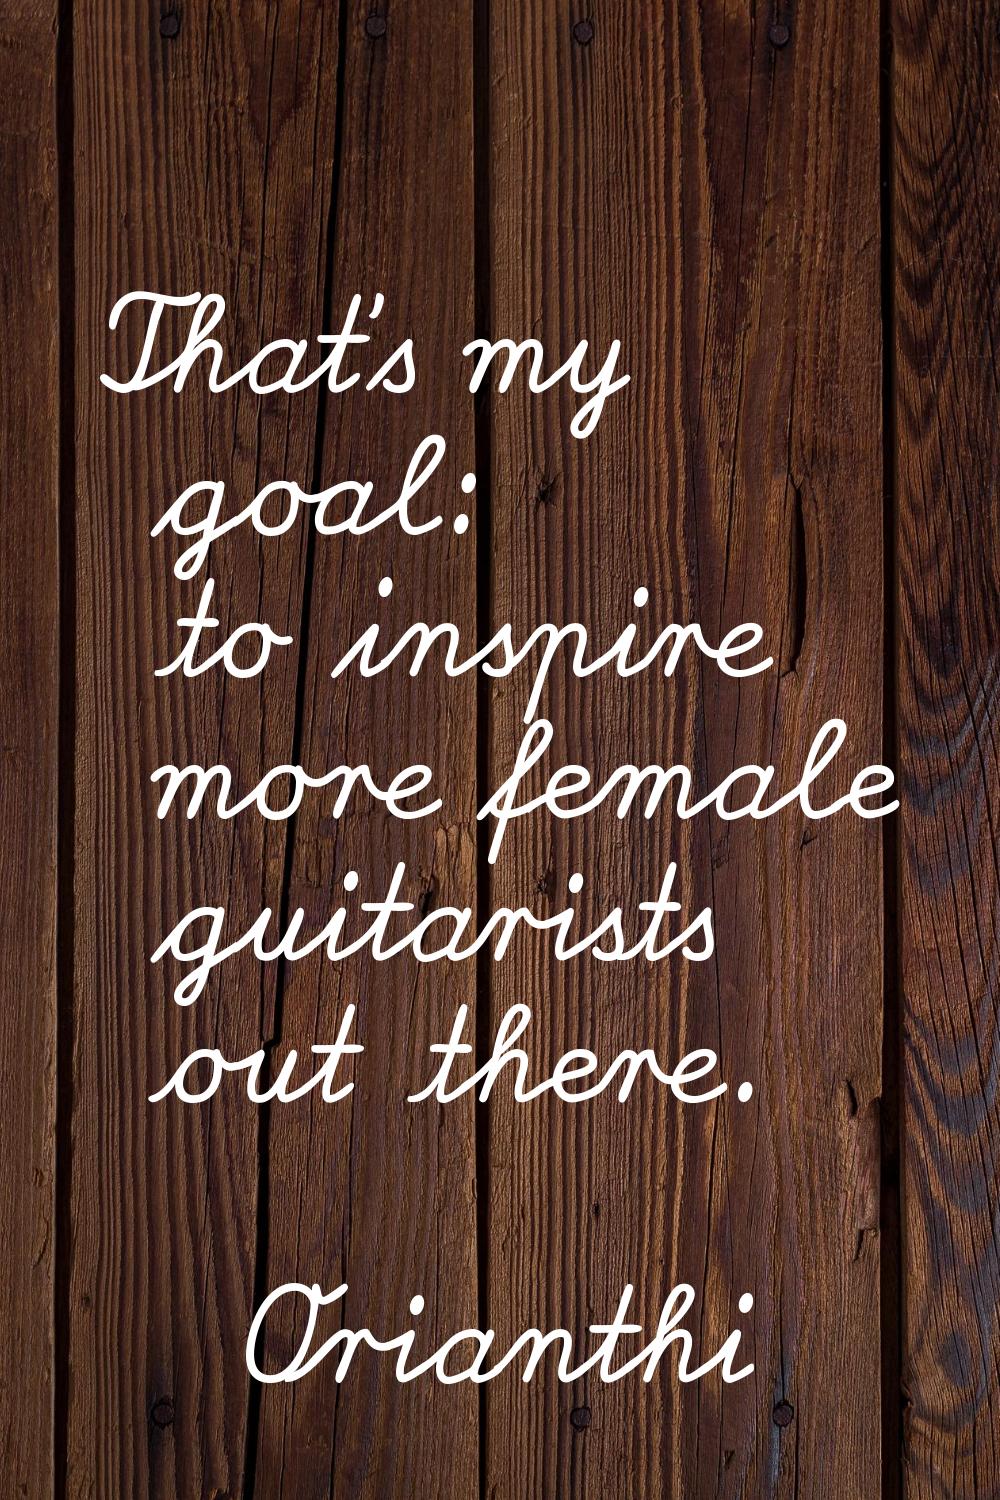 That's my goal: to inspire more female guitarists out there.